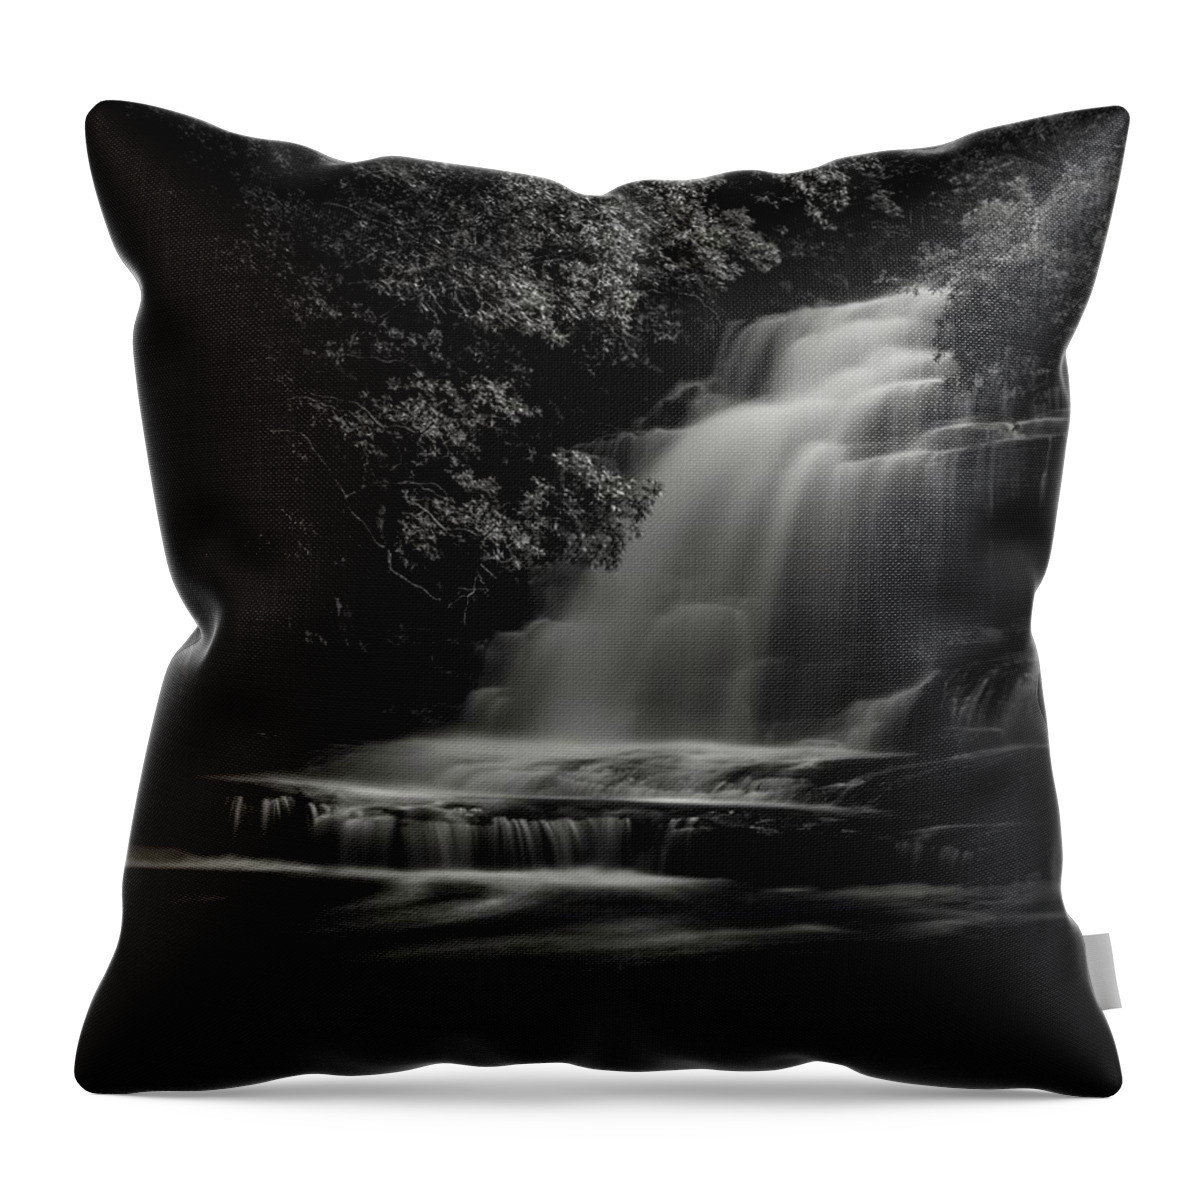  Throw Pillow featuring the photograph Somersby by Grant Galbraith